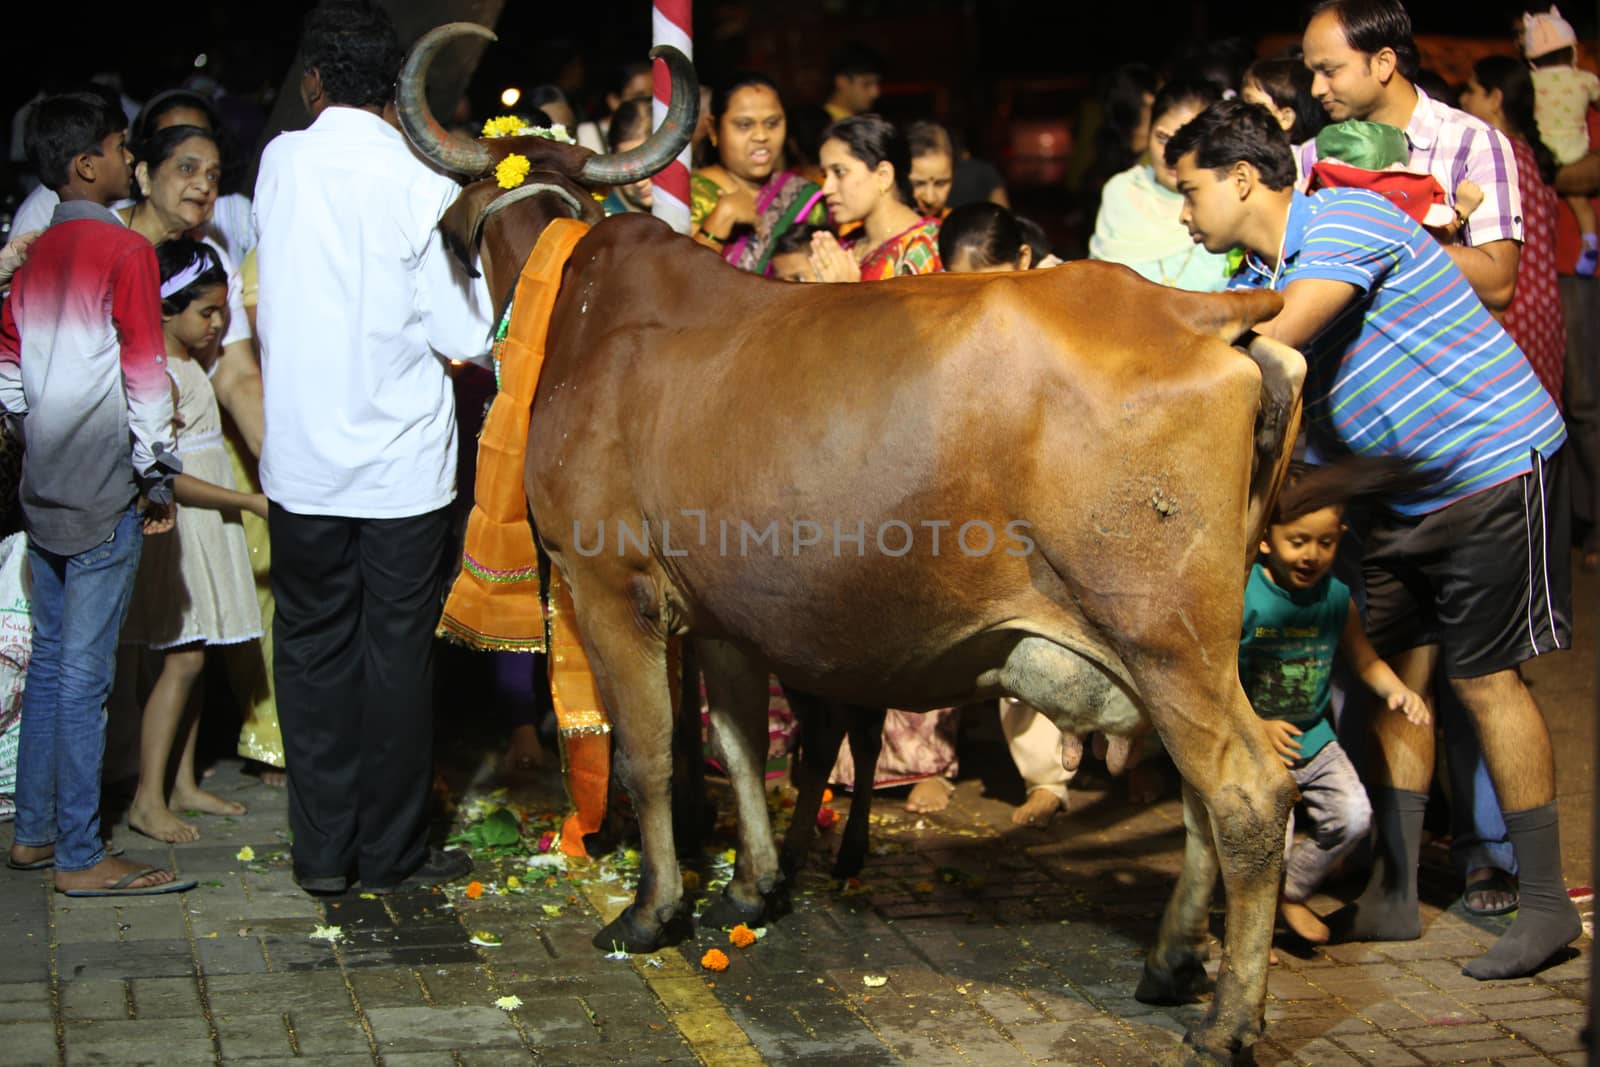 Pune, India - November 7, 2015: People in India worshipping the cow on the occasion of Diwali festival in India on Vasubaras day